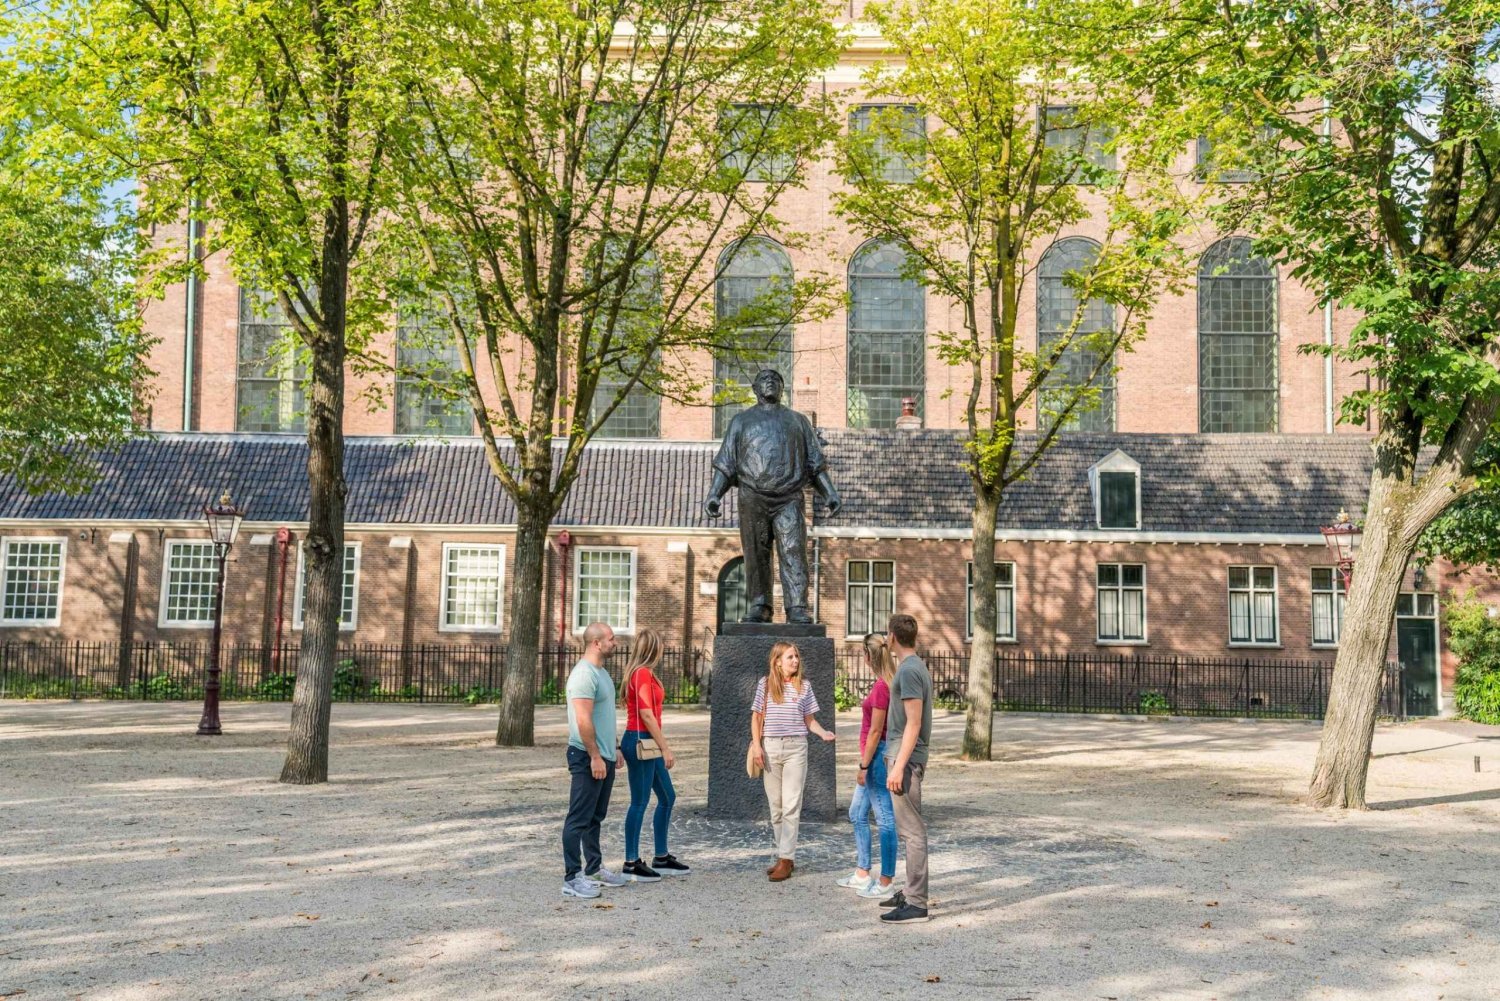 Amsterdam: Life of Anne Frank and World War II Walking Tour